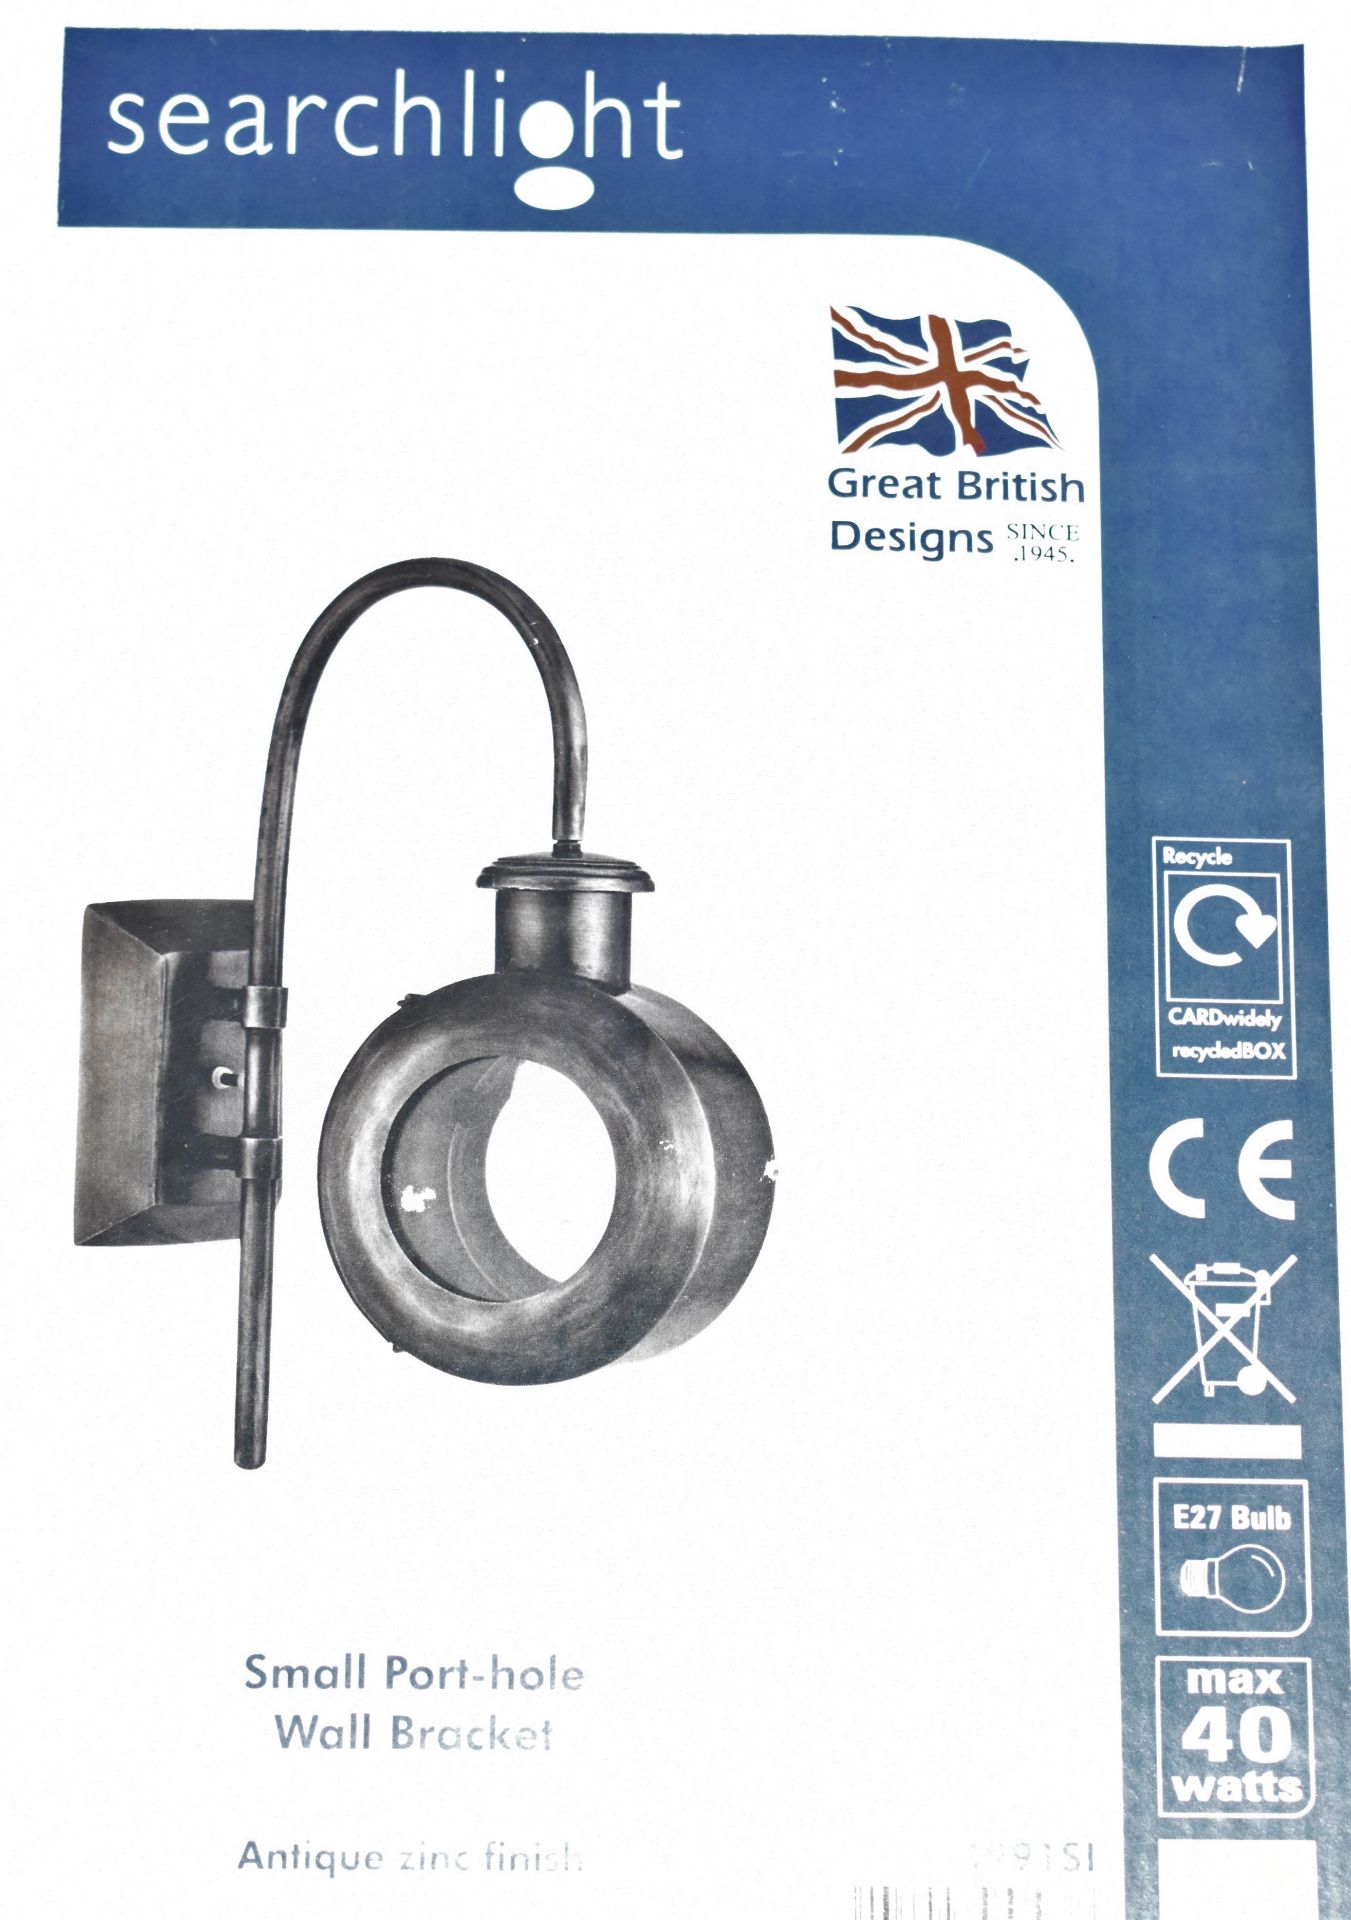 1 x Searchlight Port Hole Wall Bracket Small - Antique Zinc - Product Code 4991SI - New Boxed - Image 2 of 3